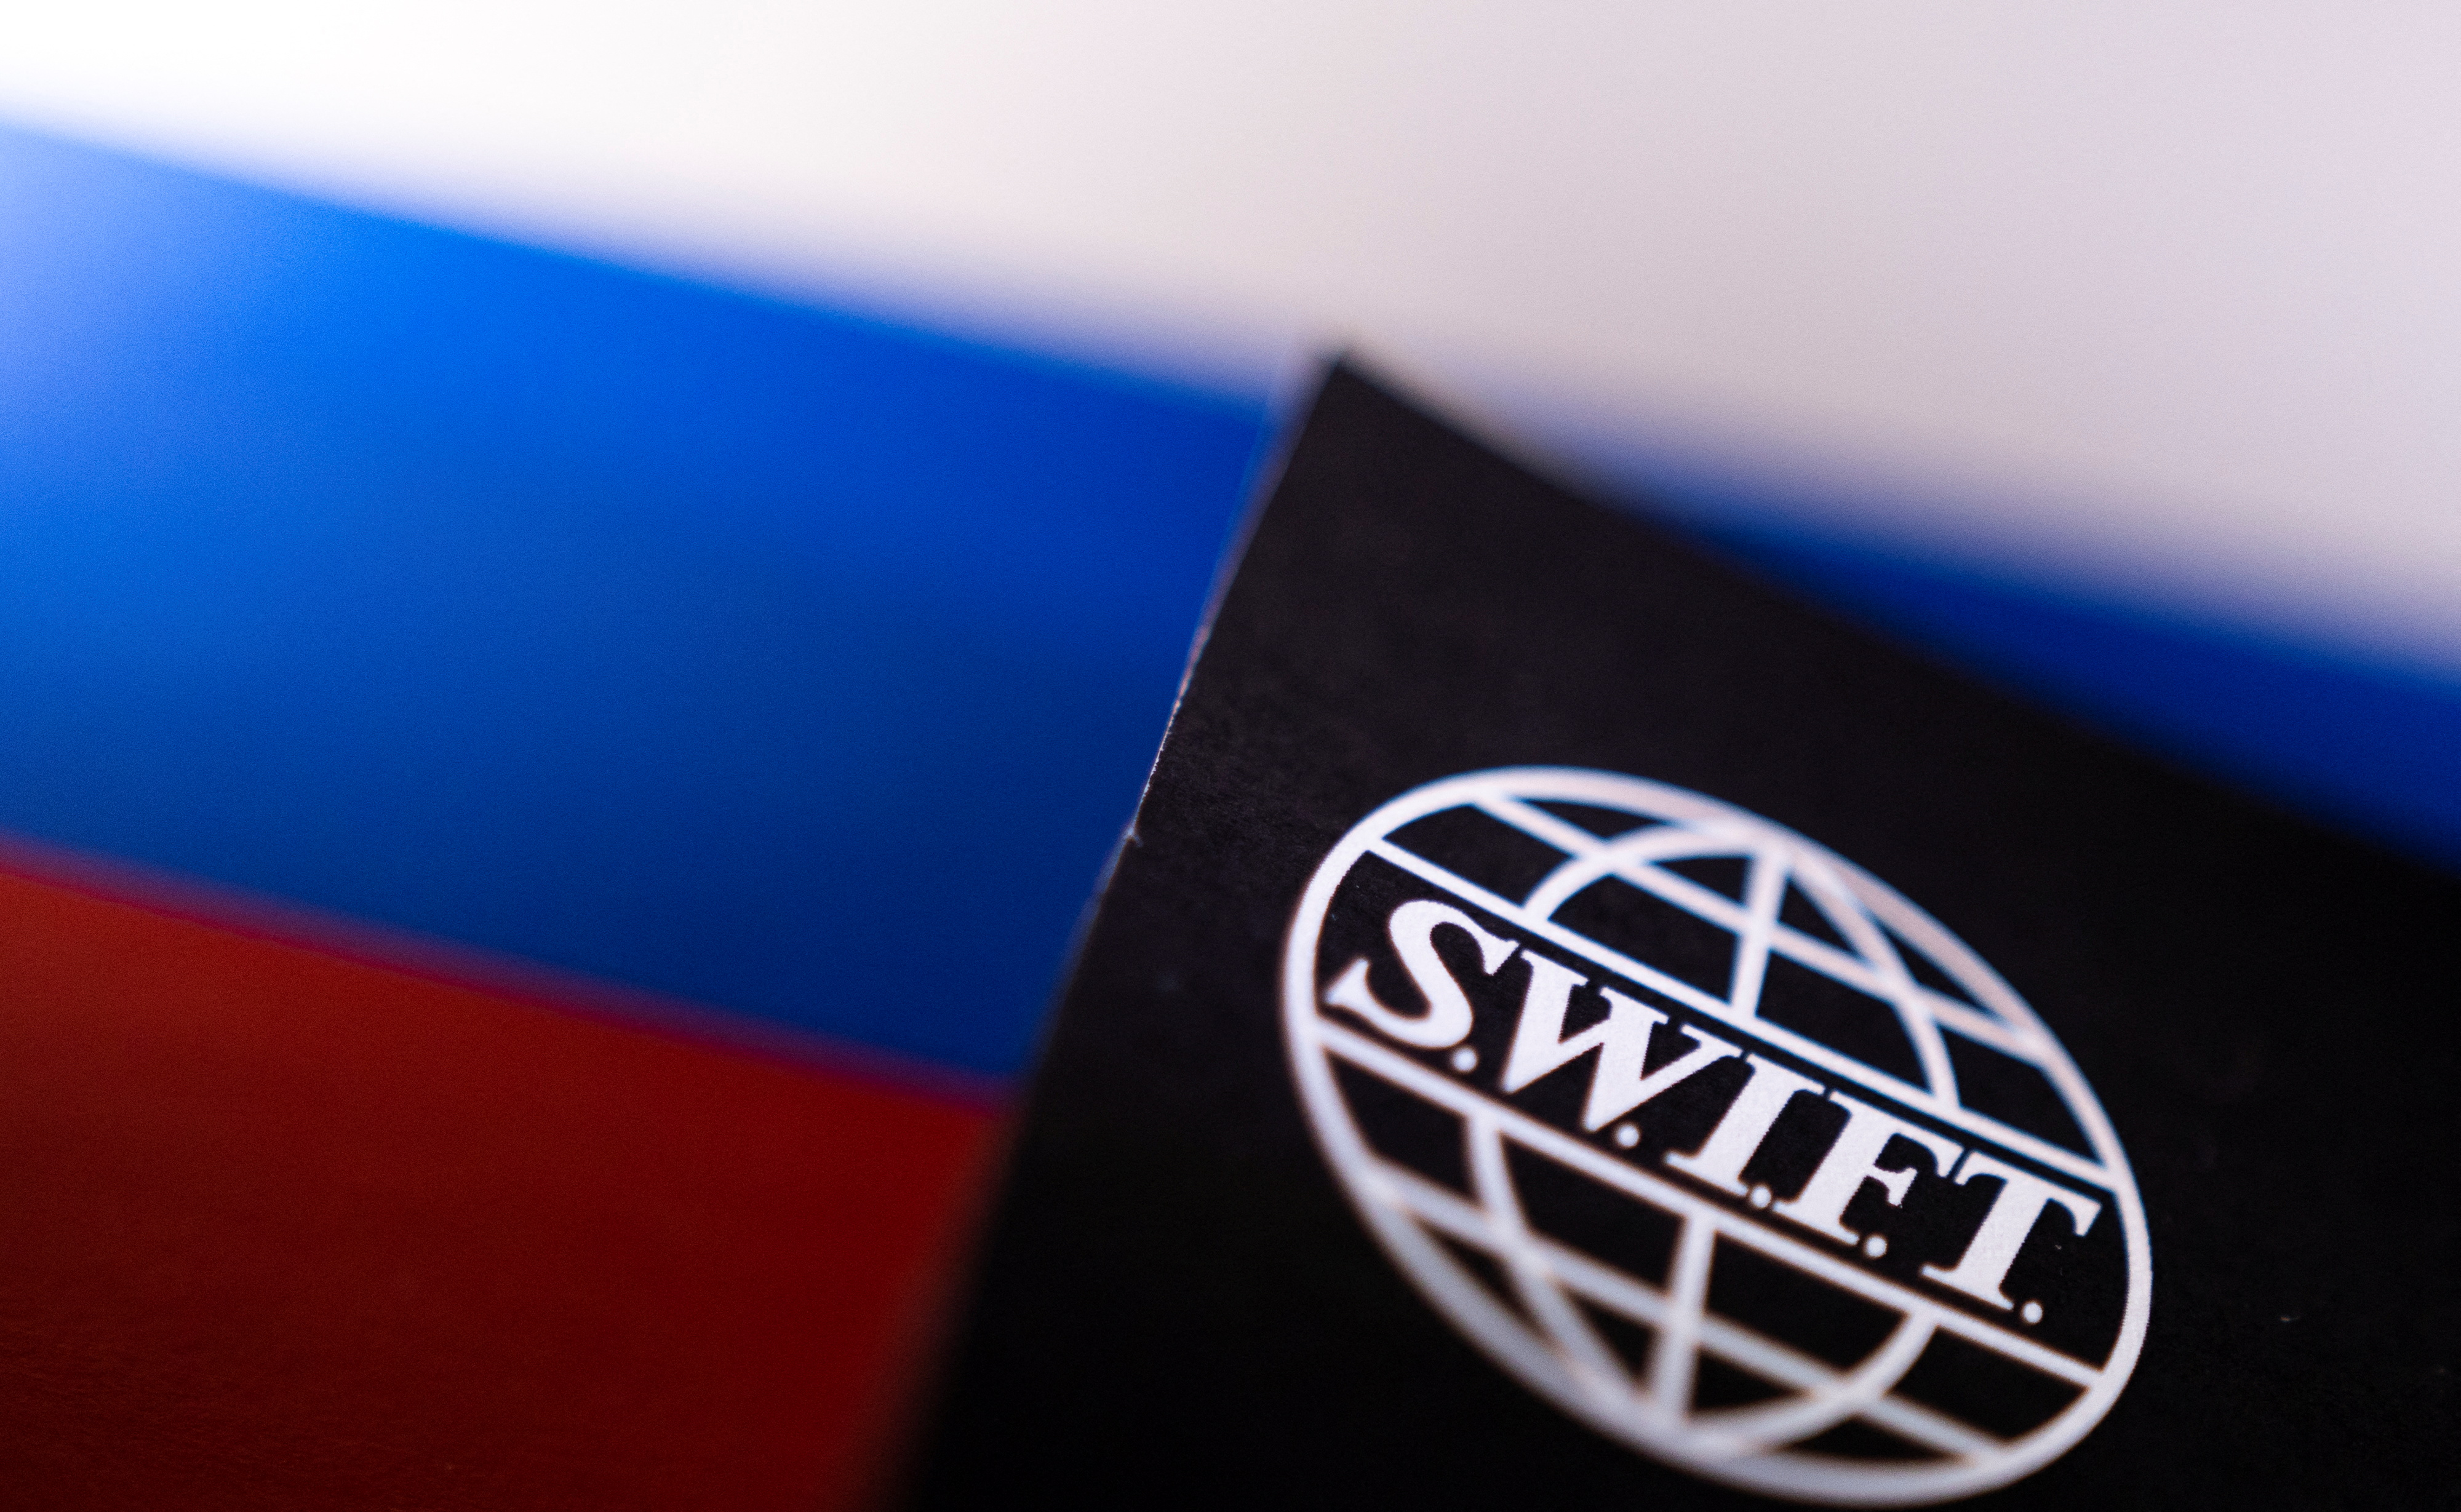 Swift logo is placed on a Russian flag are seen in this illustration taken, Bosnia and Herzegovina, February 25, 2022. REUTERS/Dado Ruvic/Illustration